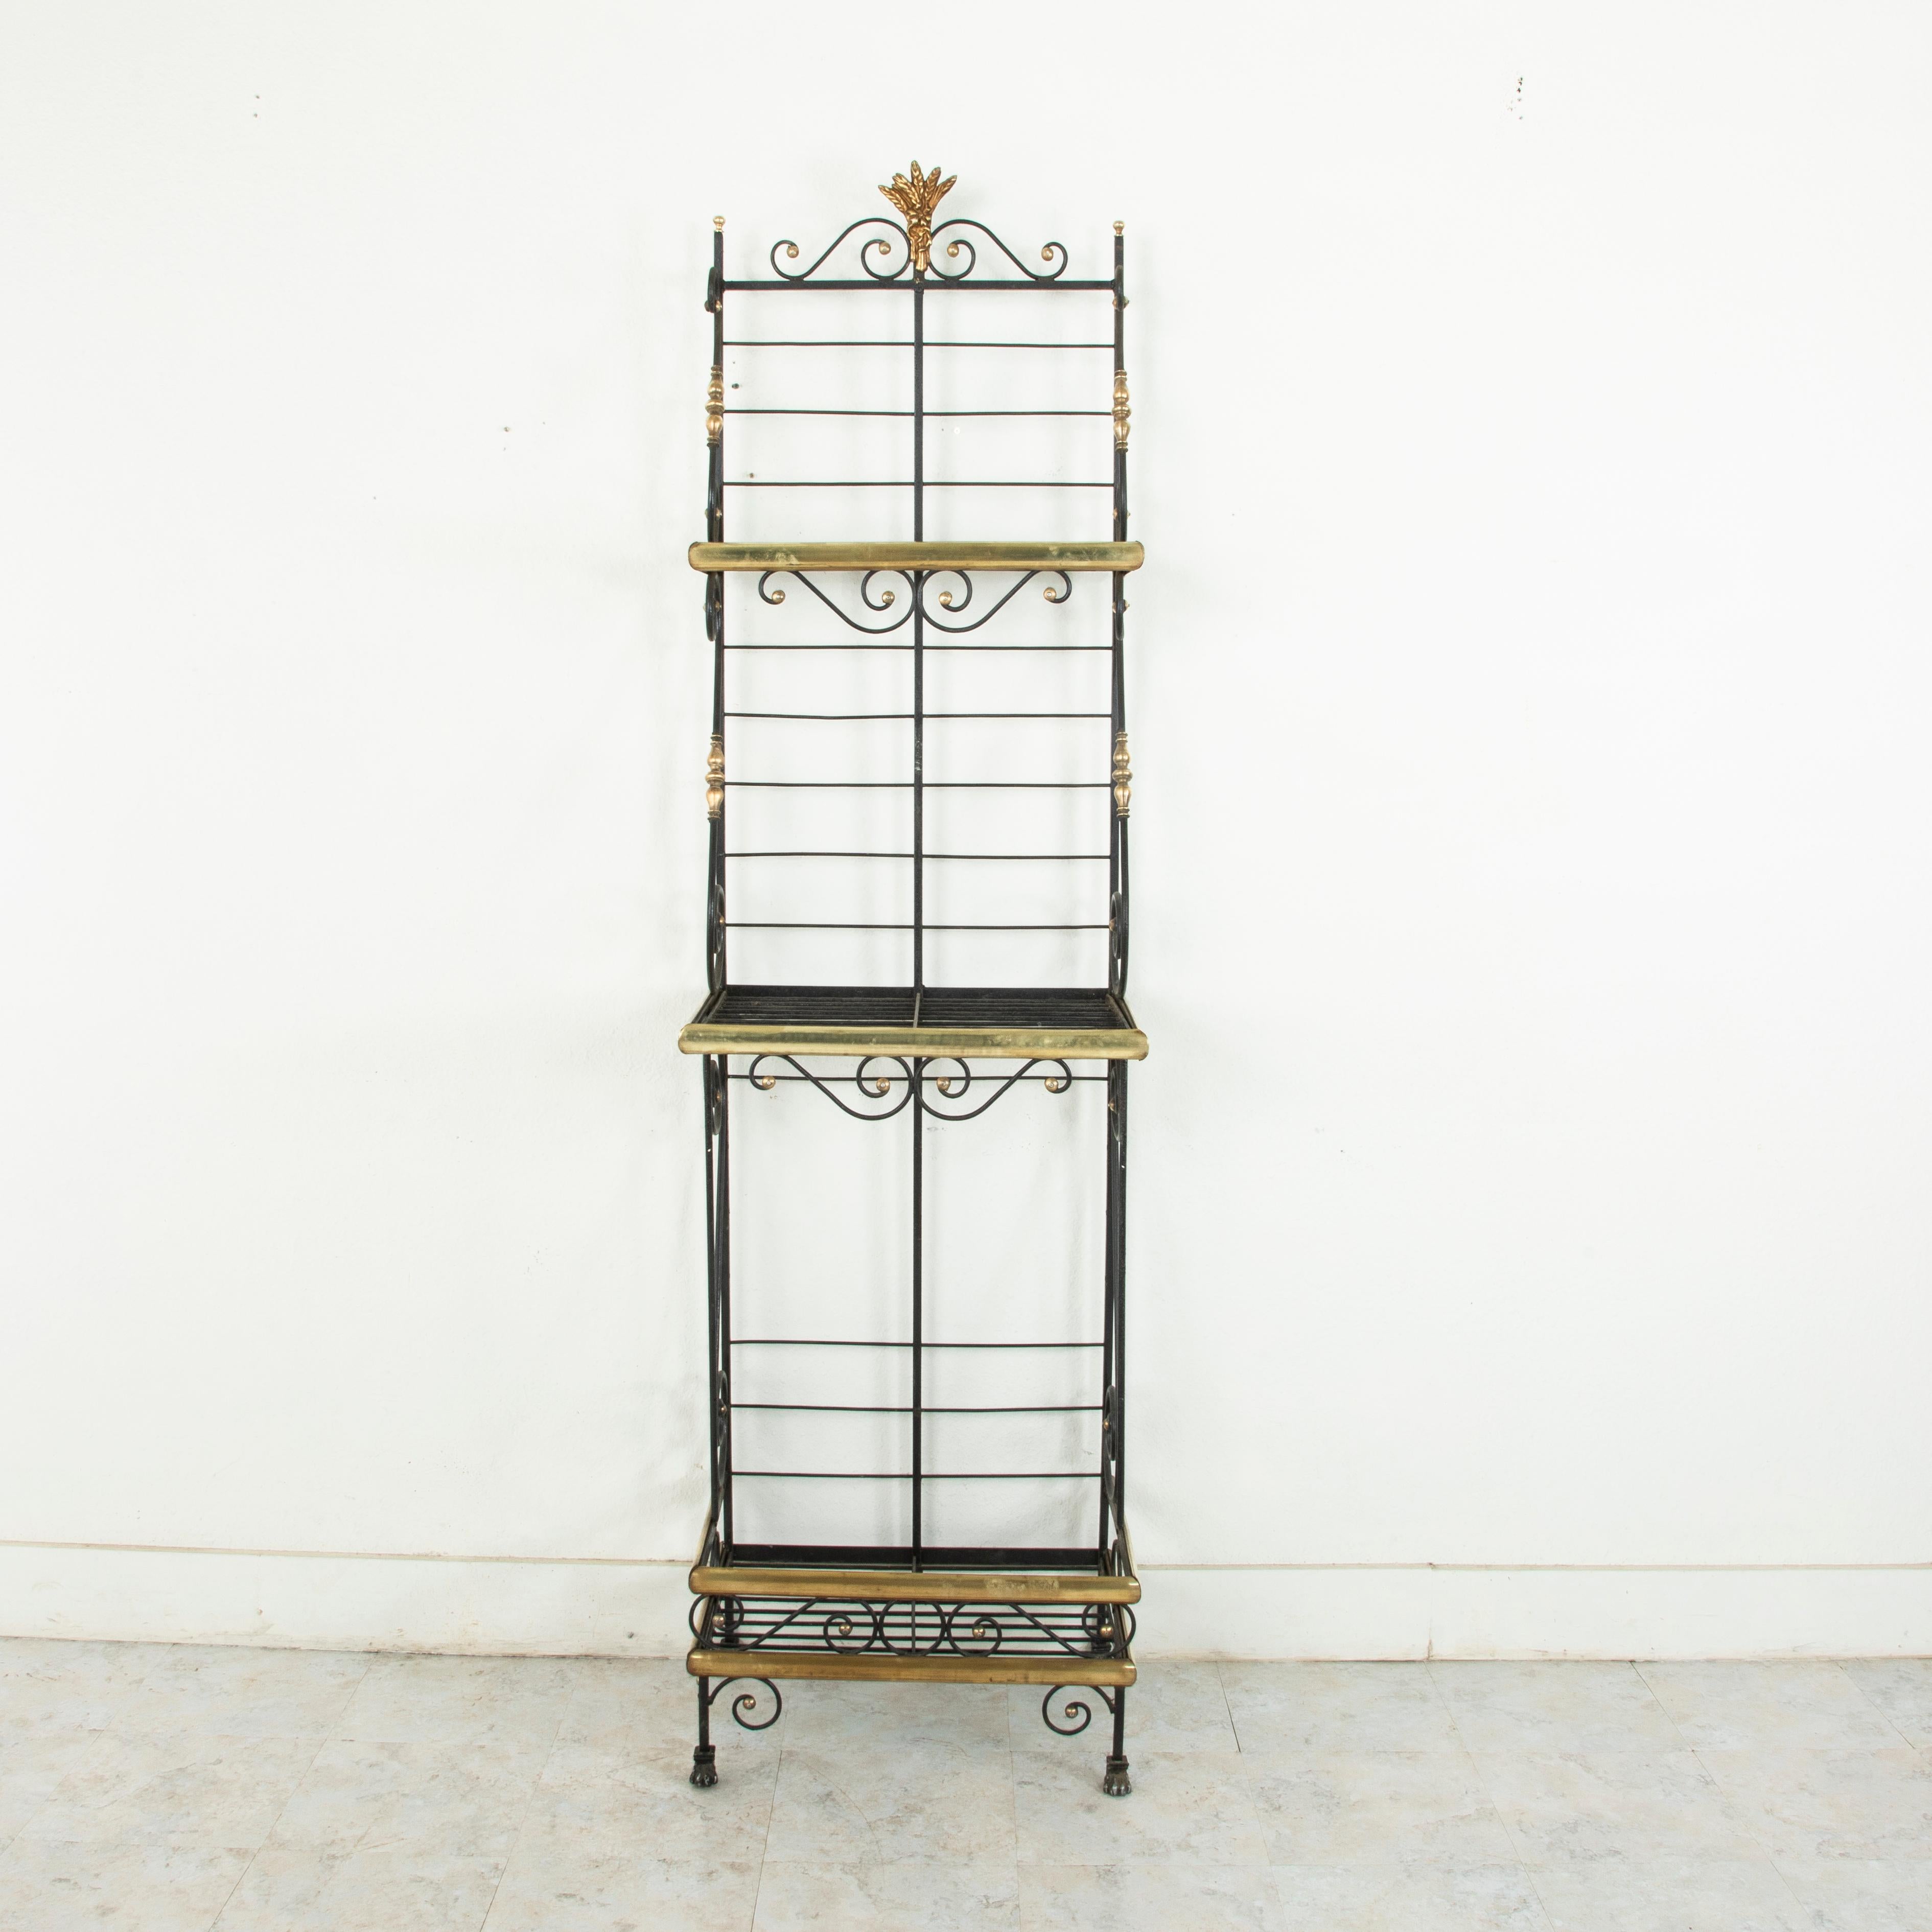 A rare find in a unique small scale, this mid-20th century French iron baker's rack is trimmed in brass around each of its three shelves. The shelves are joined by scrolling iron detailed with brass turnings that lend support as well as an aesthetic